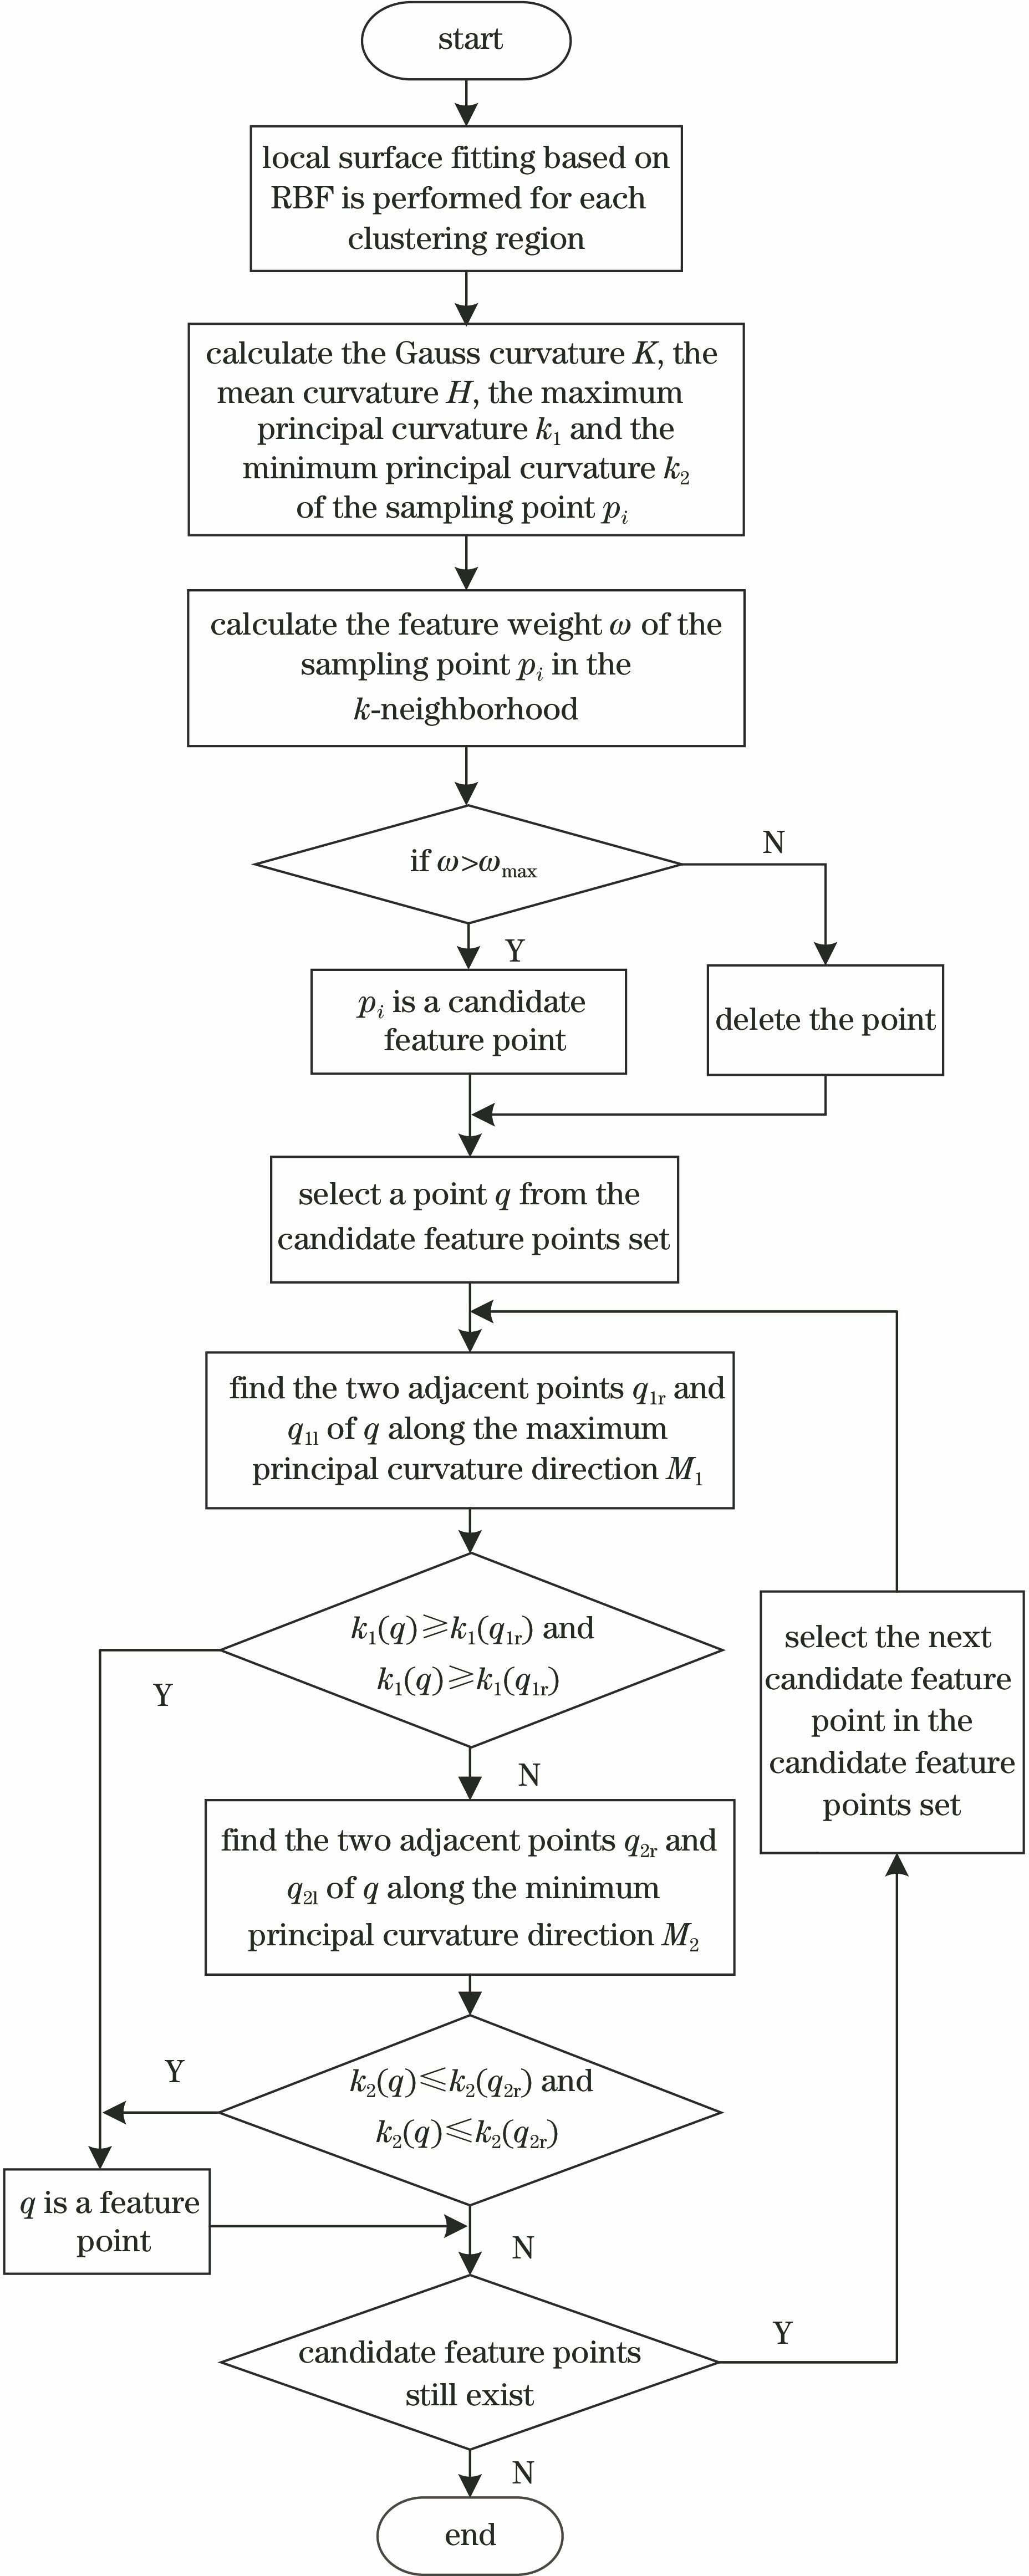 Flow chart of the feature point recognition stage